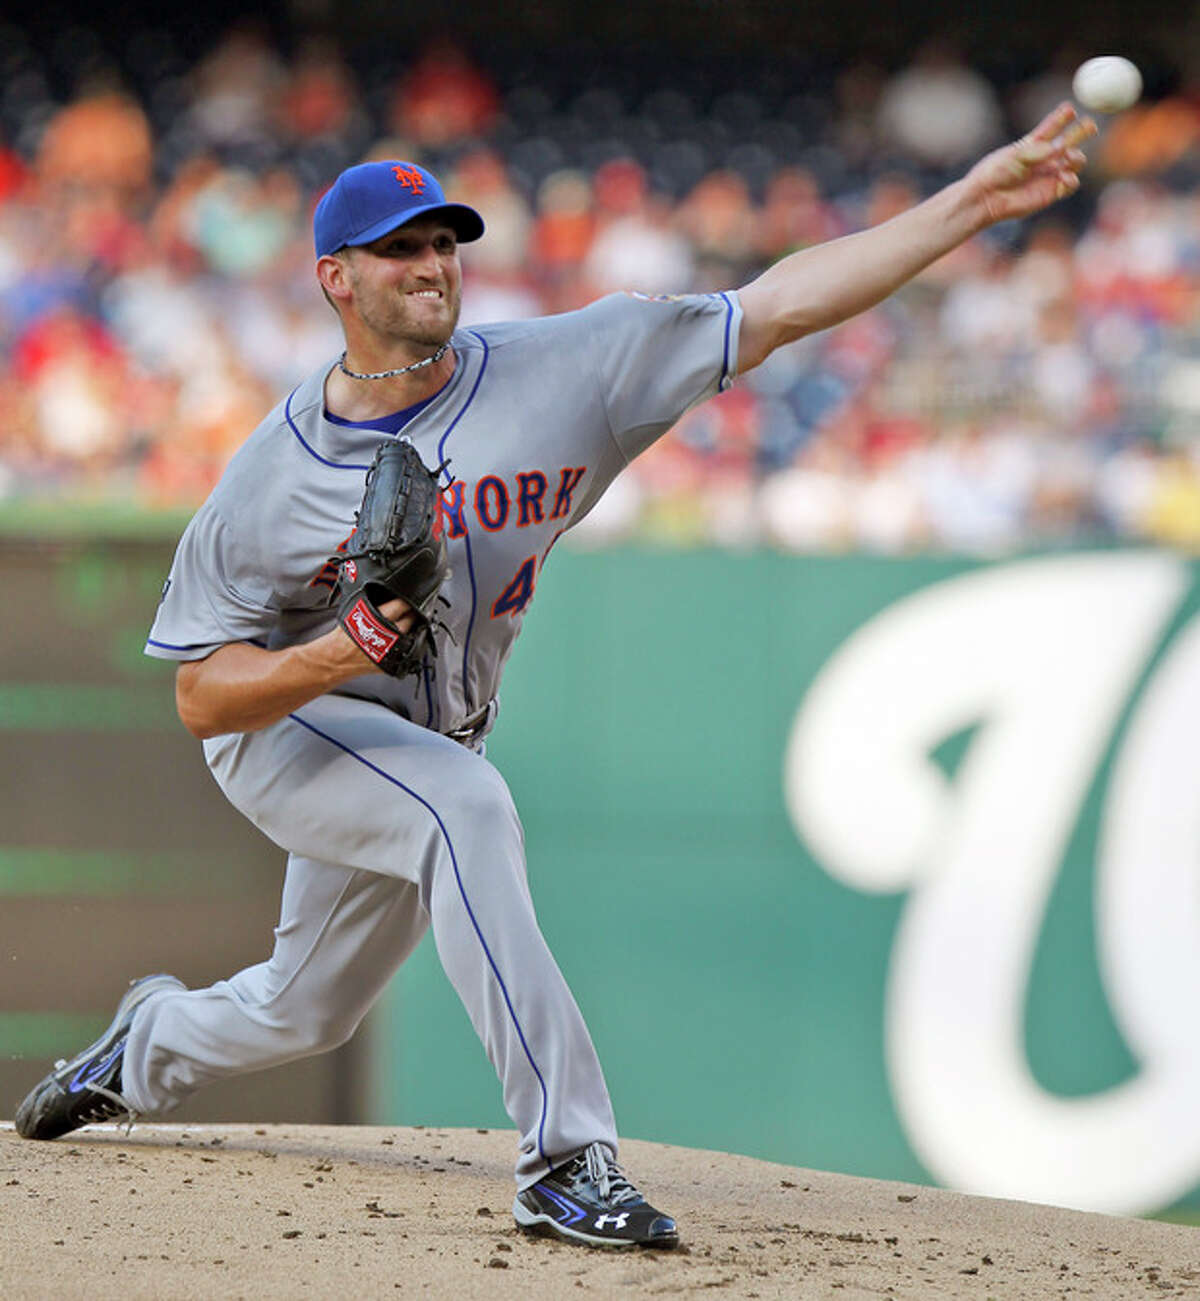 New York Mets starting pitcher Jon Niese throws during the first inning of a baseball game against the Washington Nationals on Tuesday, July 17, 2012, in Washington. (AP Photo/Alex Brandon)